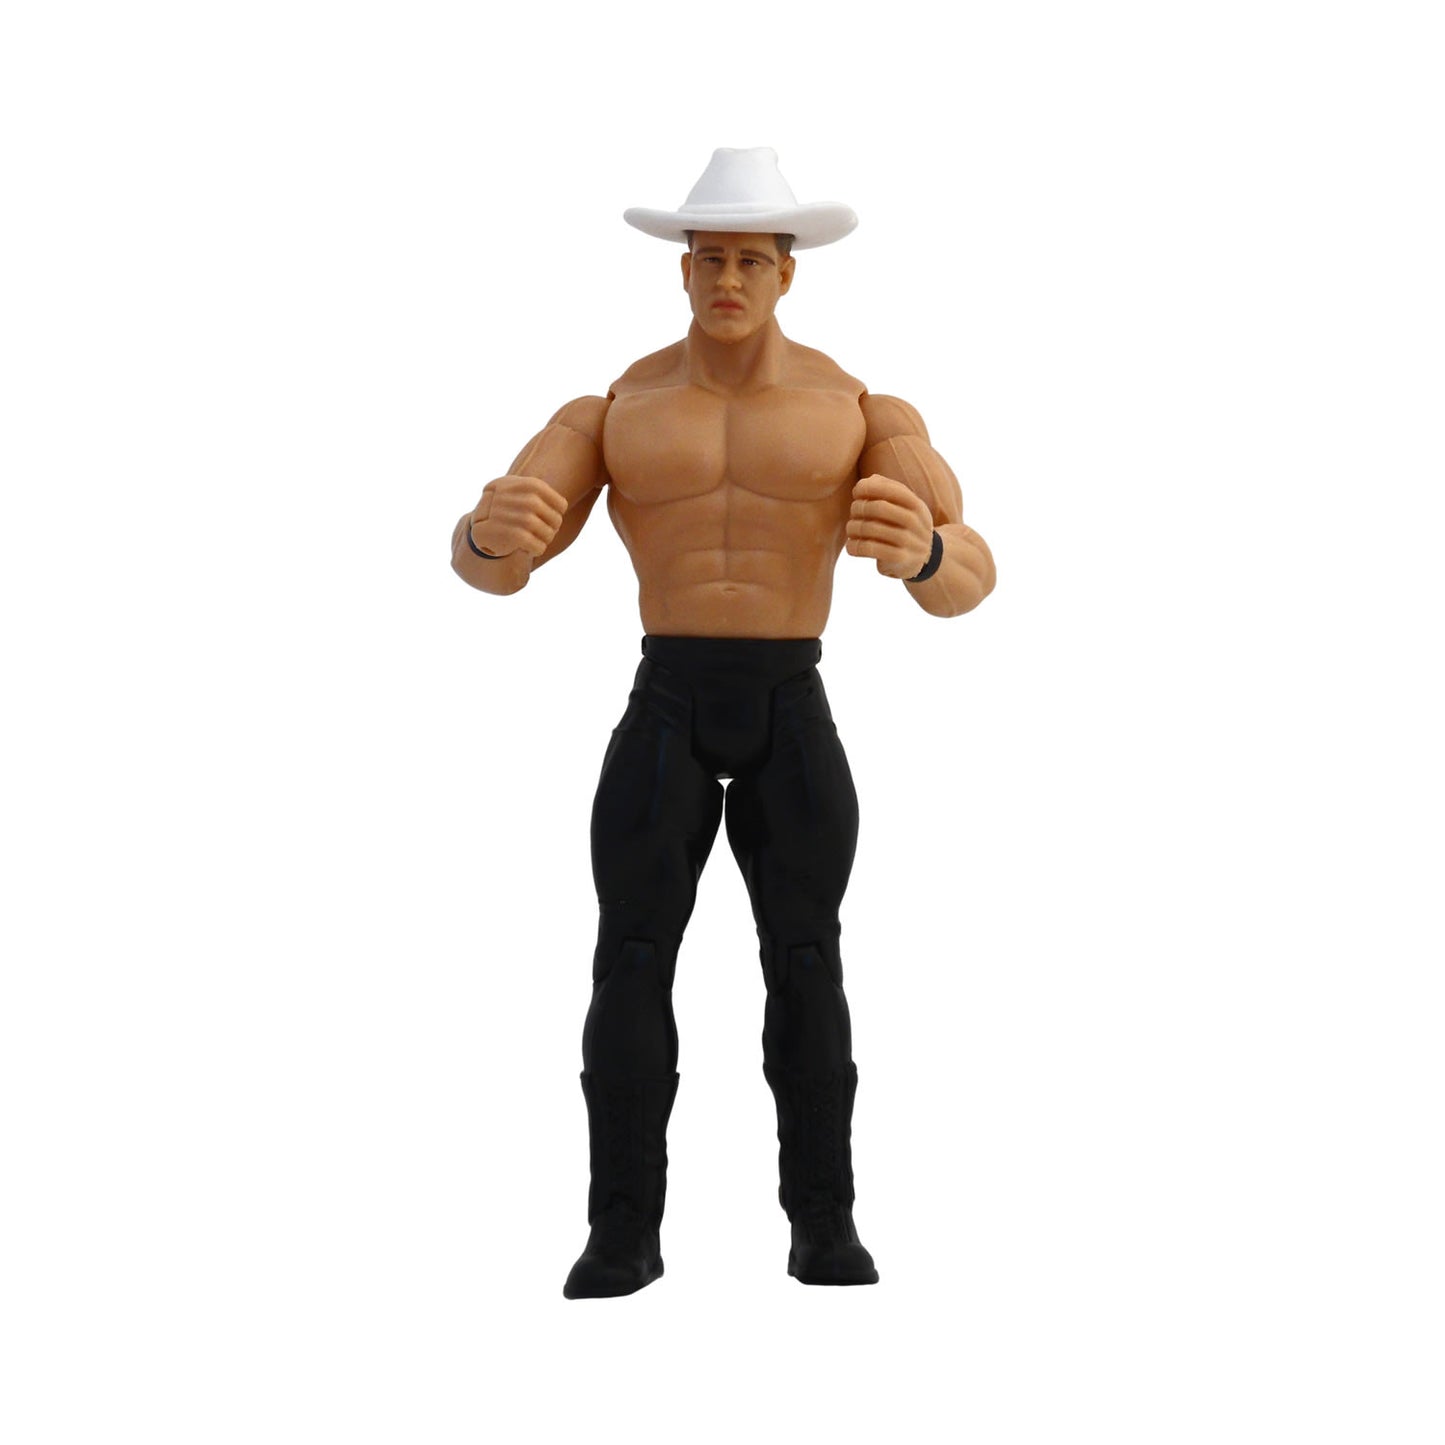 WWE Ruthless Aggression Ring Rage 10.5 John "Bradshaw" Layfield Action Figure (Loose)